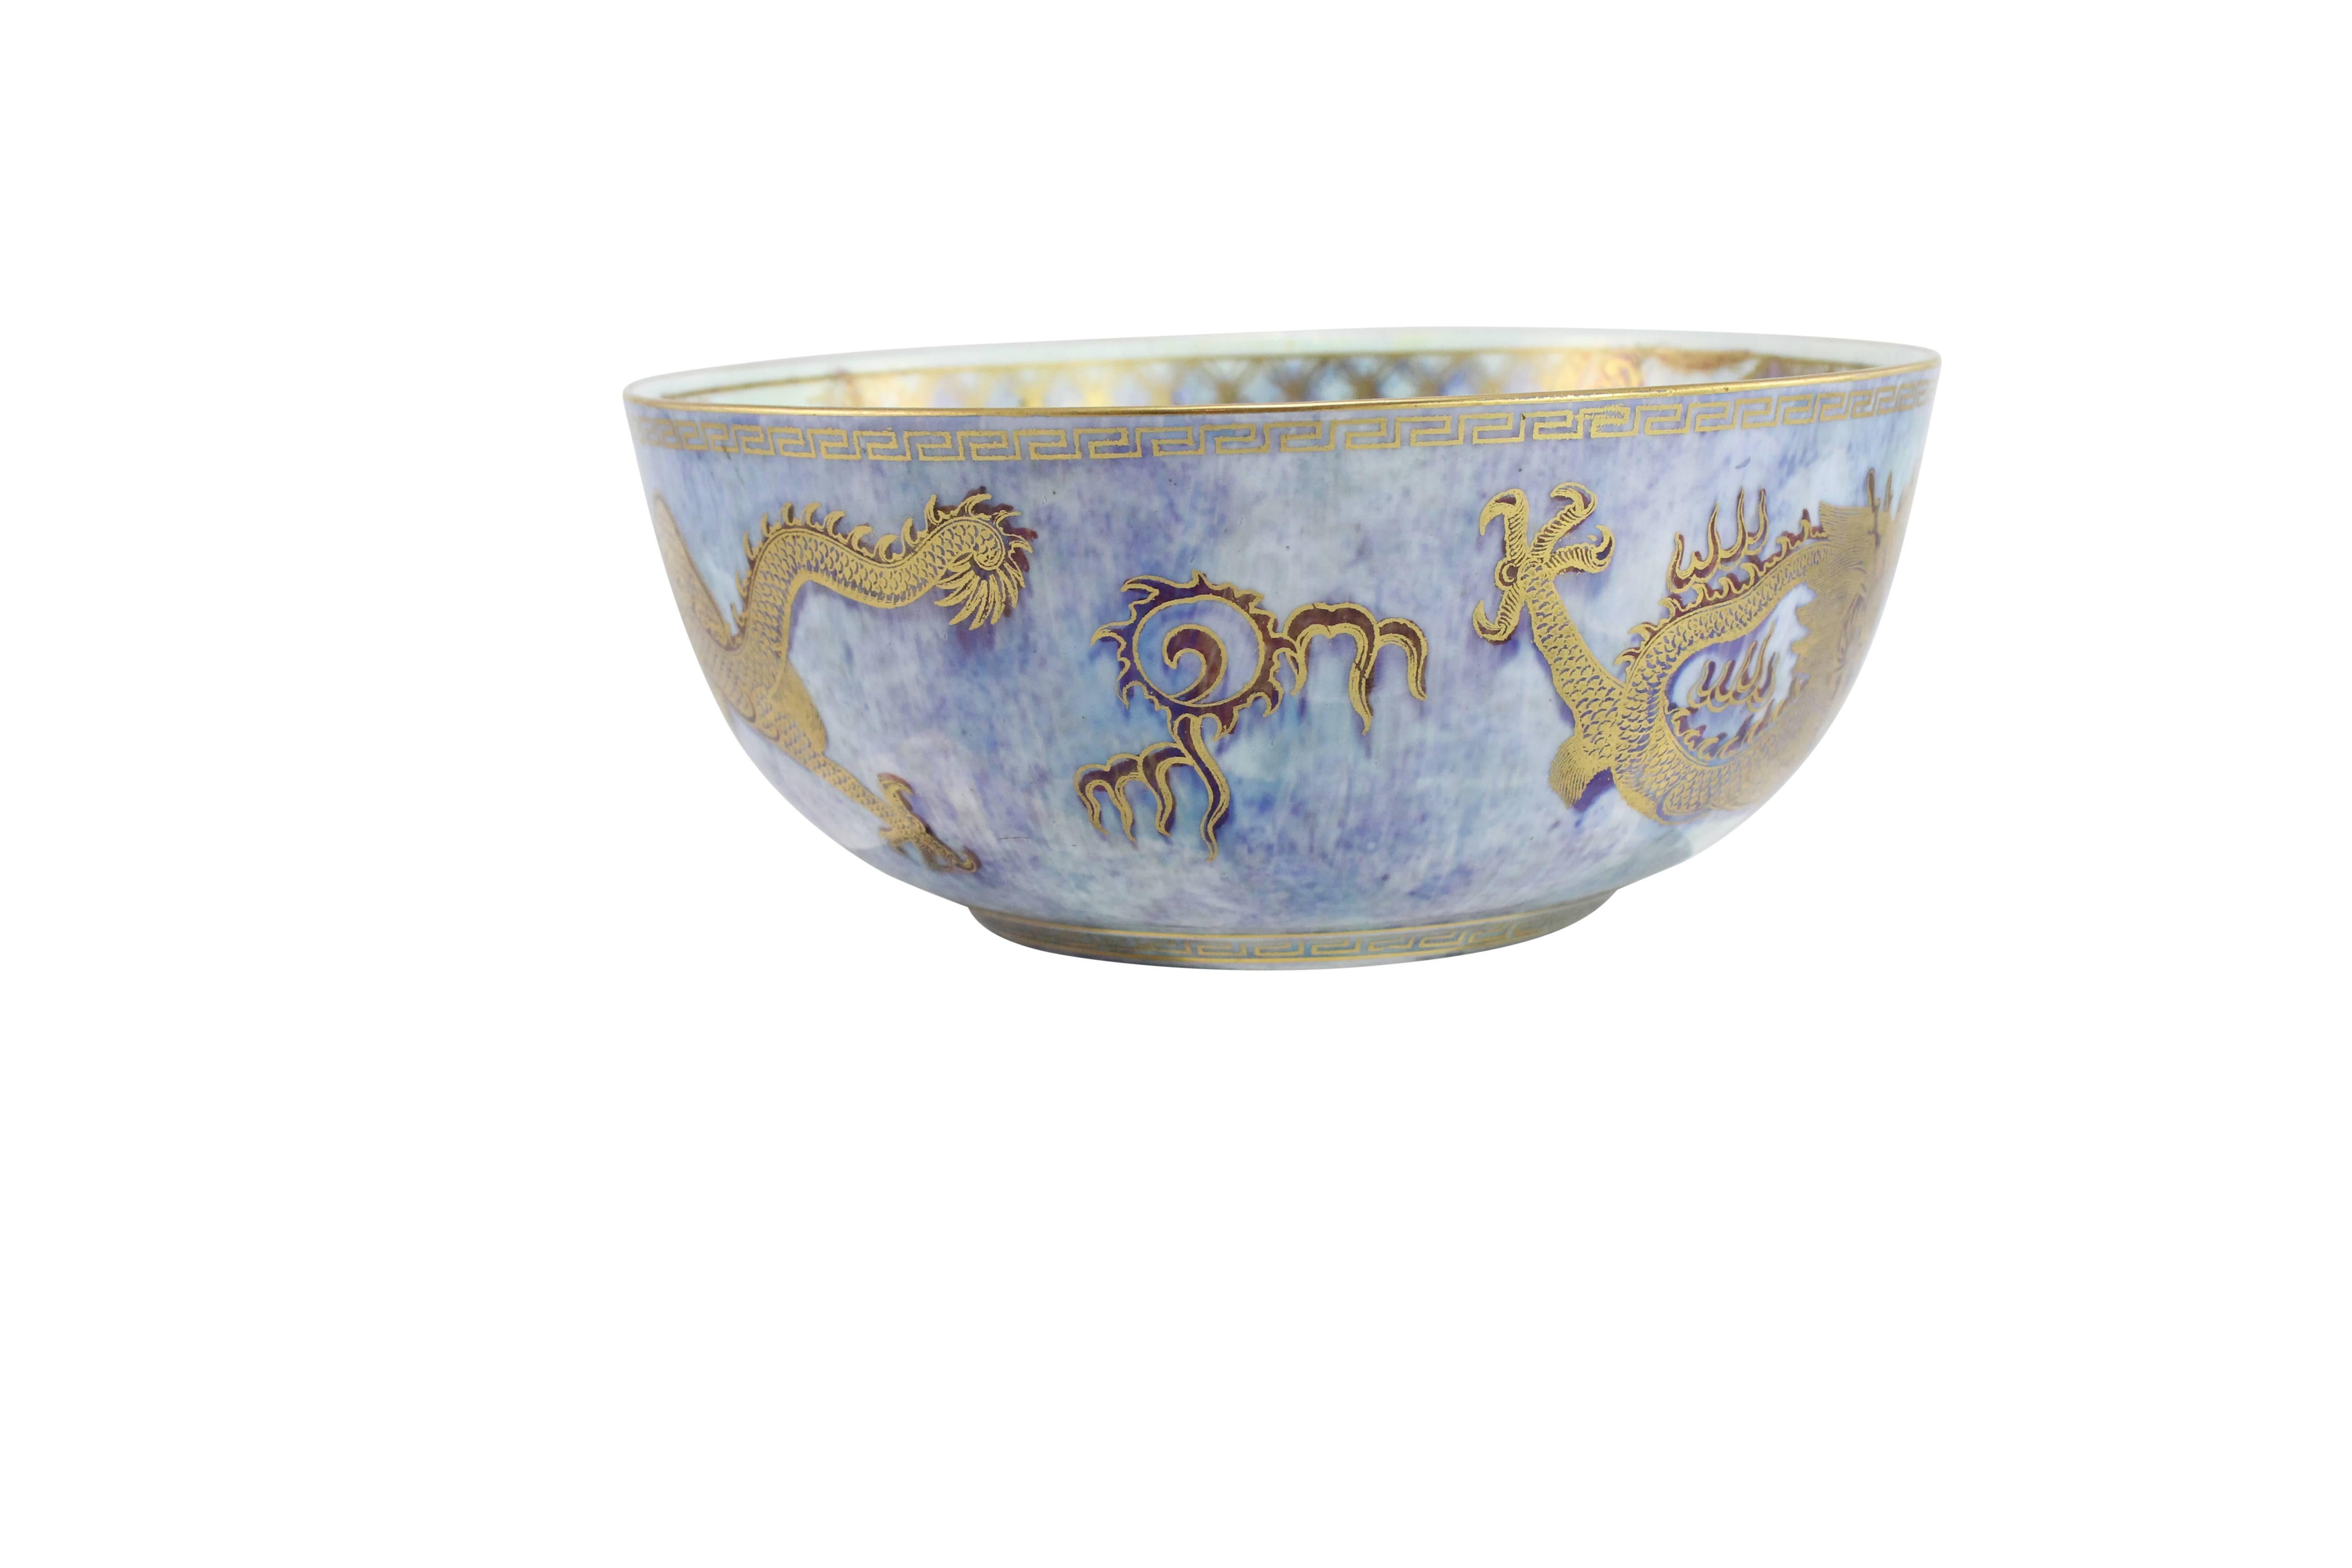 Luster 'Mythical Creatures' Series Lustreware Bowl by Wedgwood